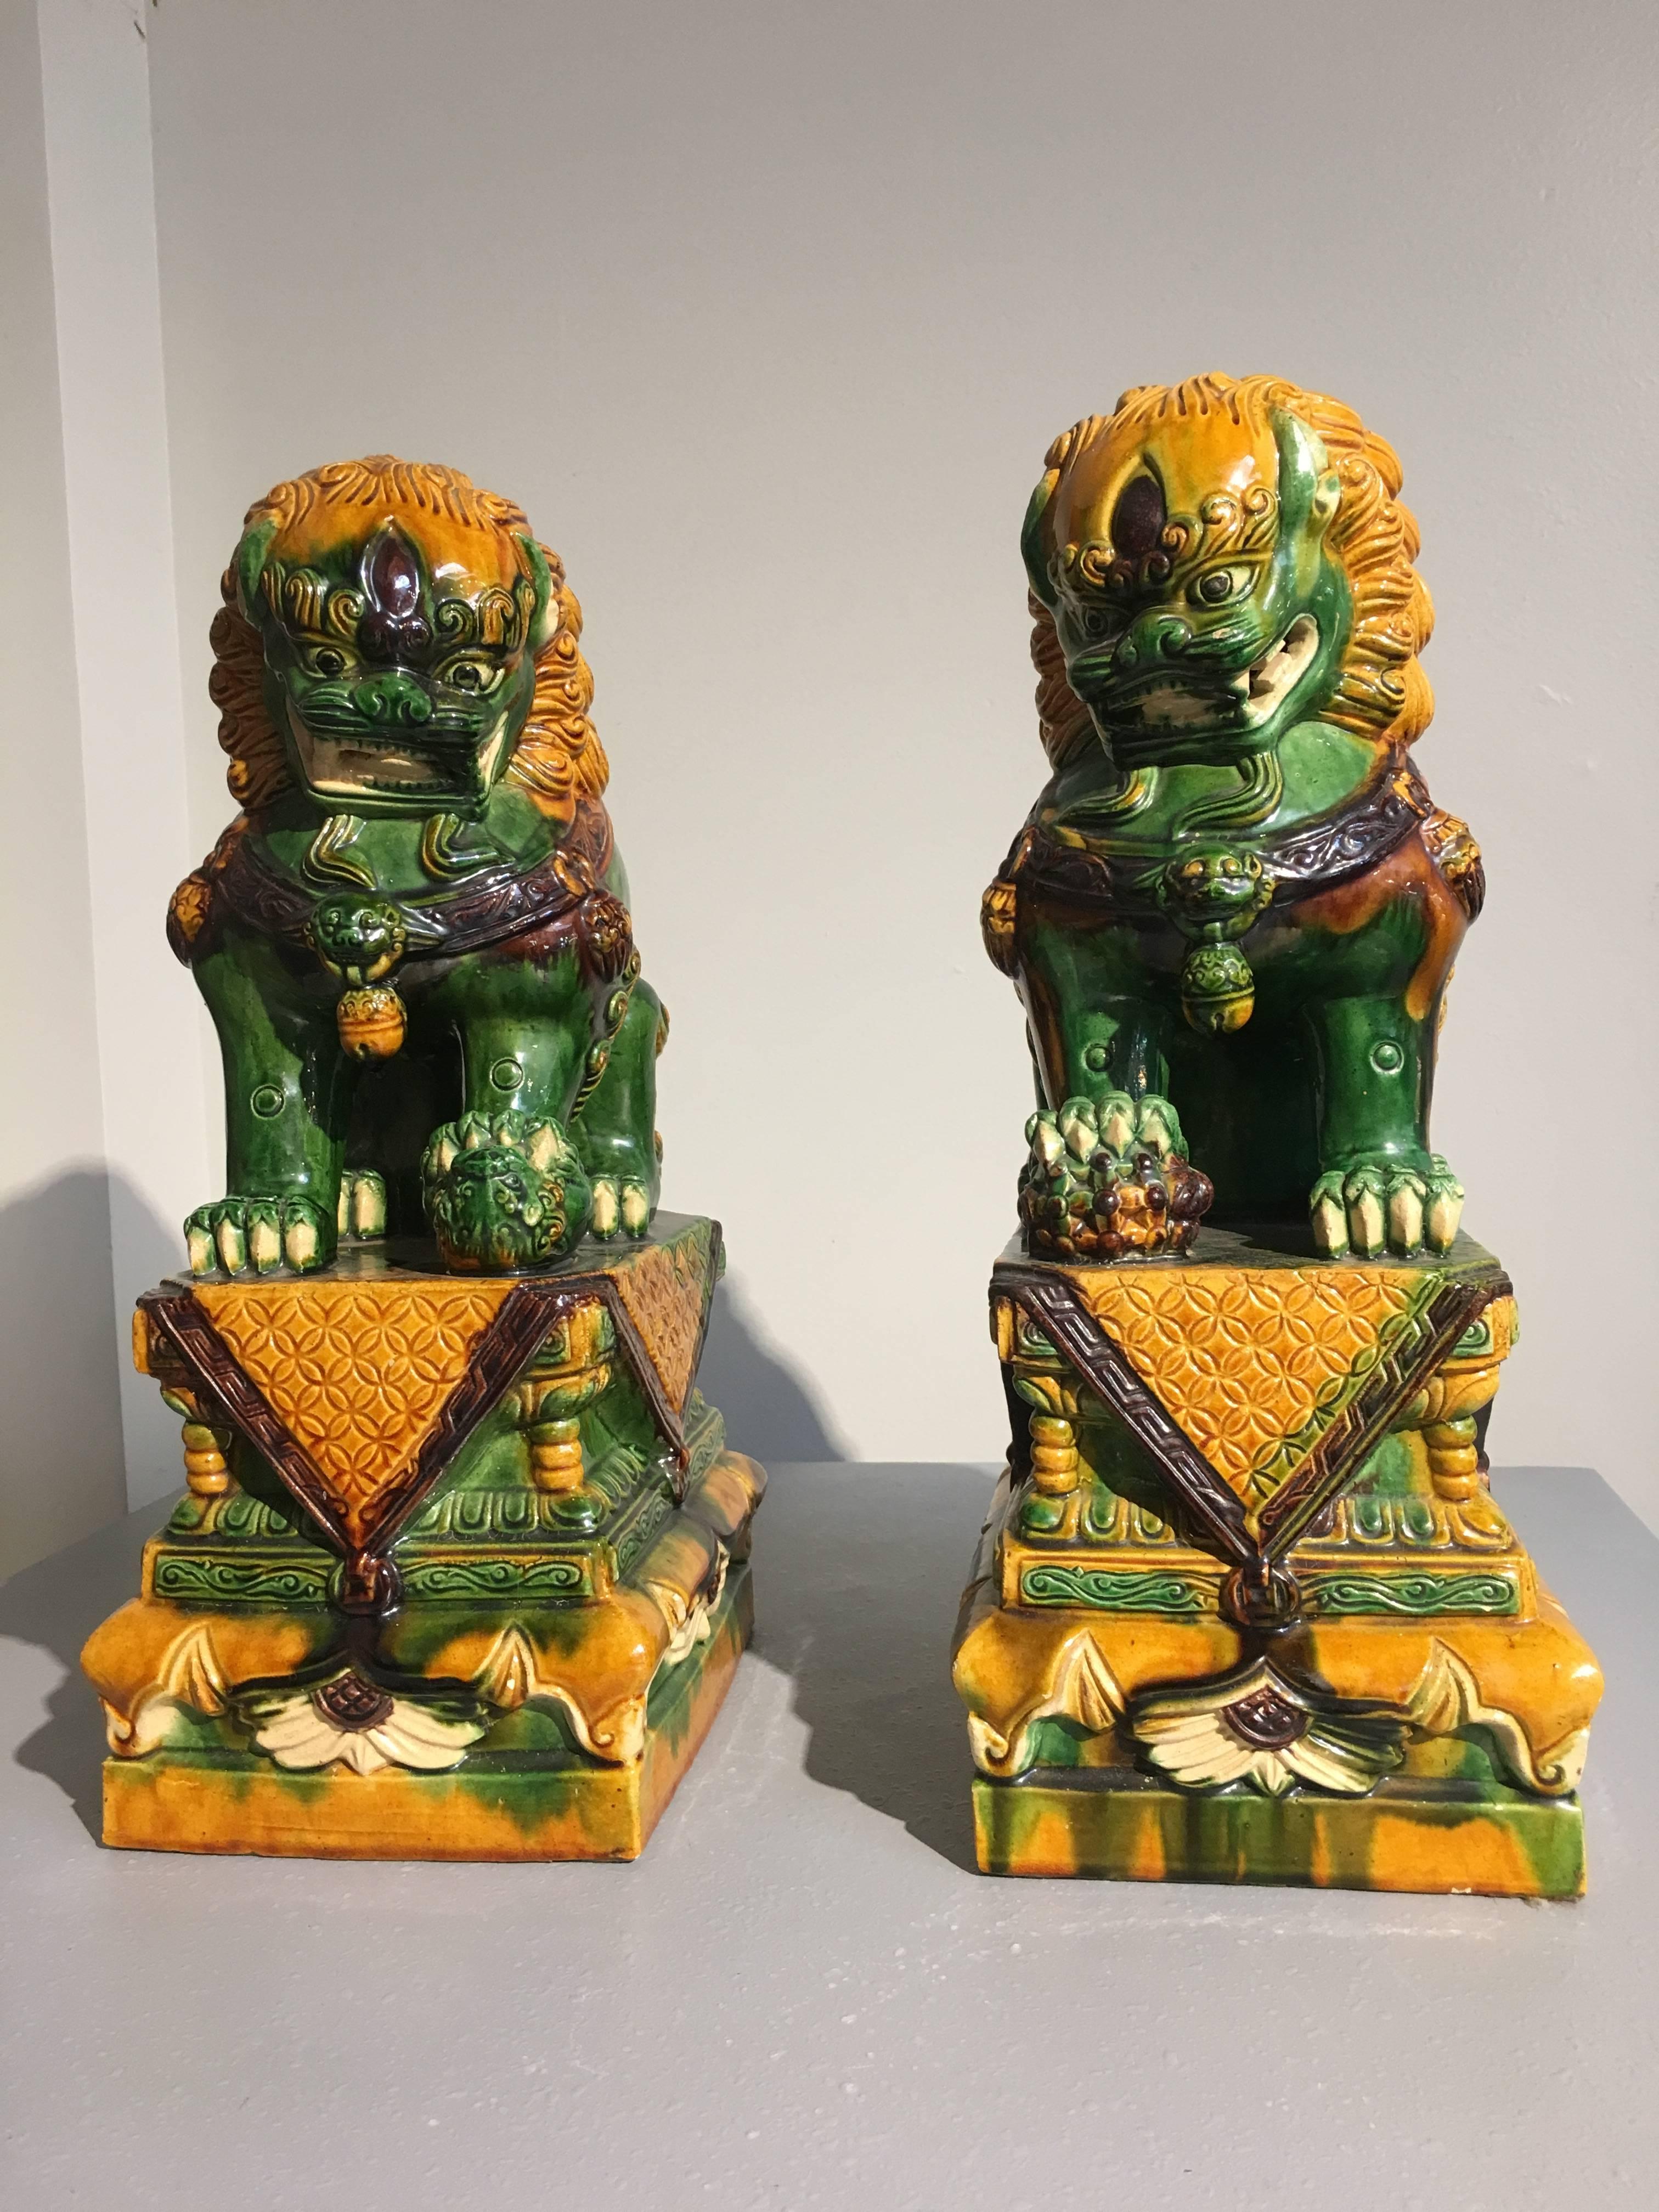 A good pair of vintage Chinese sancai (three color) glazed ceramic foo lions, also called foo dogs. Glazed in wonderful green, yellow and brown, with a nice drip effect, typical of sancai wares. 
Based on guardian lions that grace the entrances to